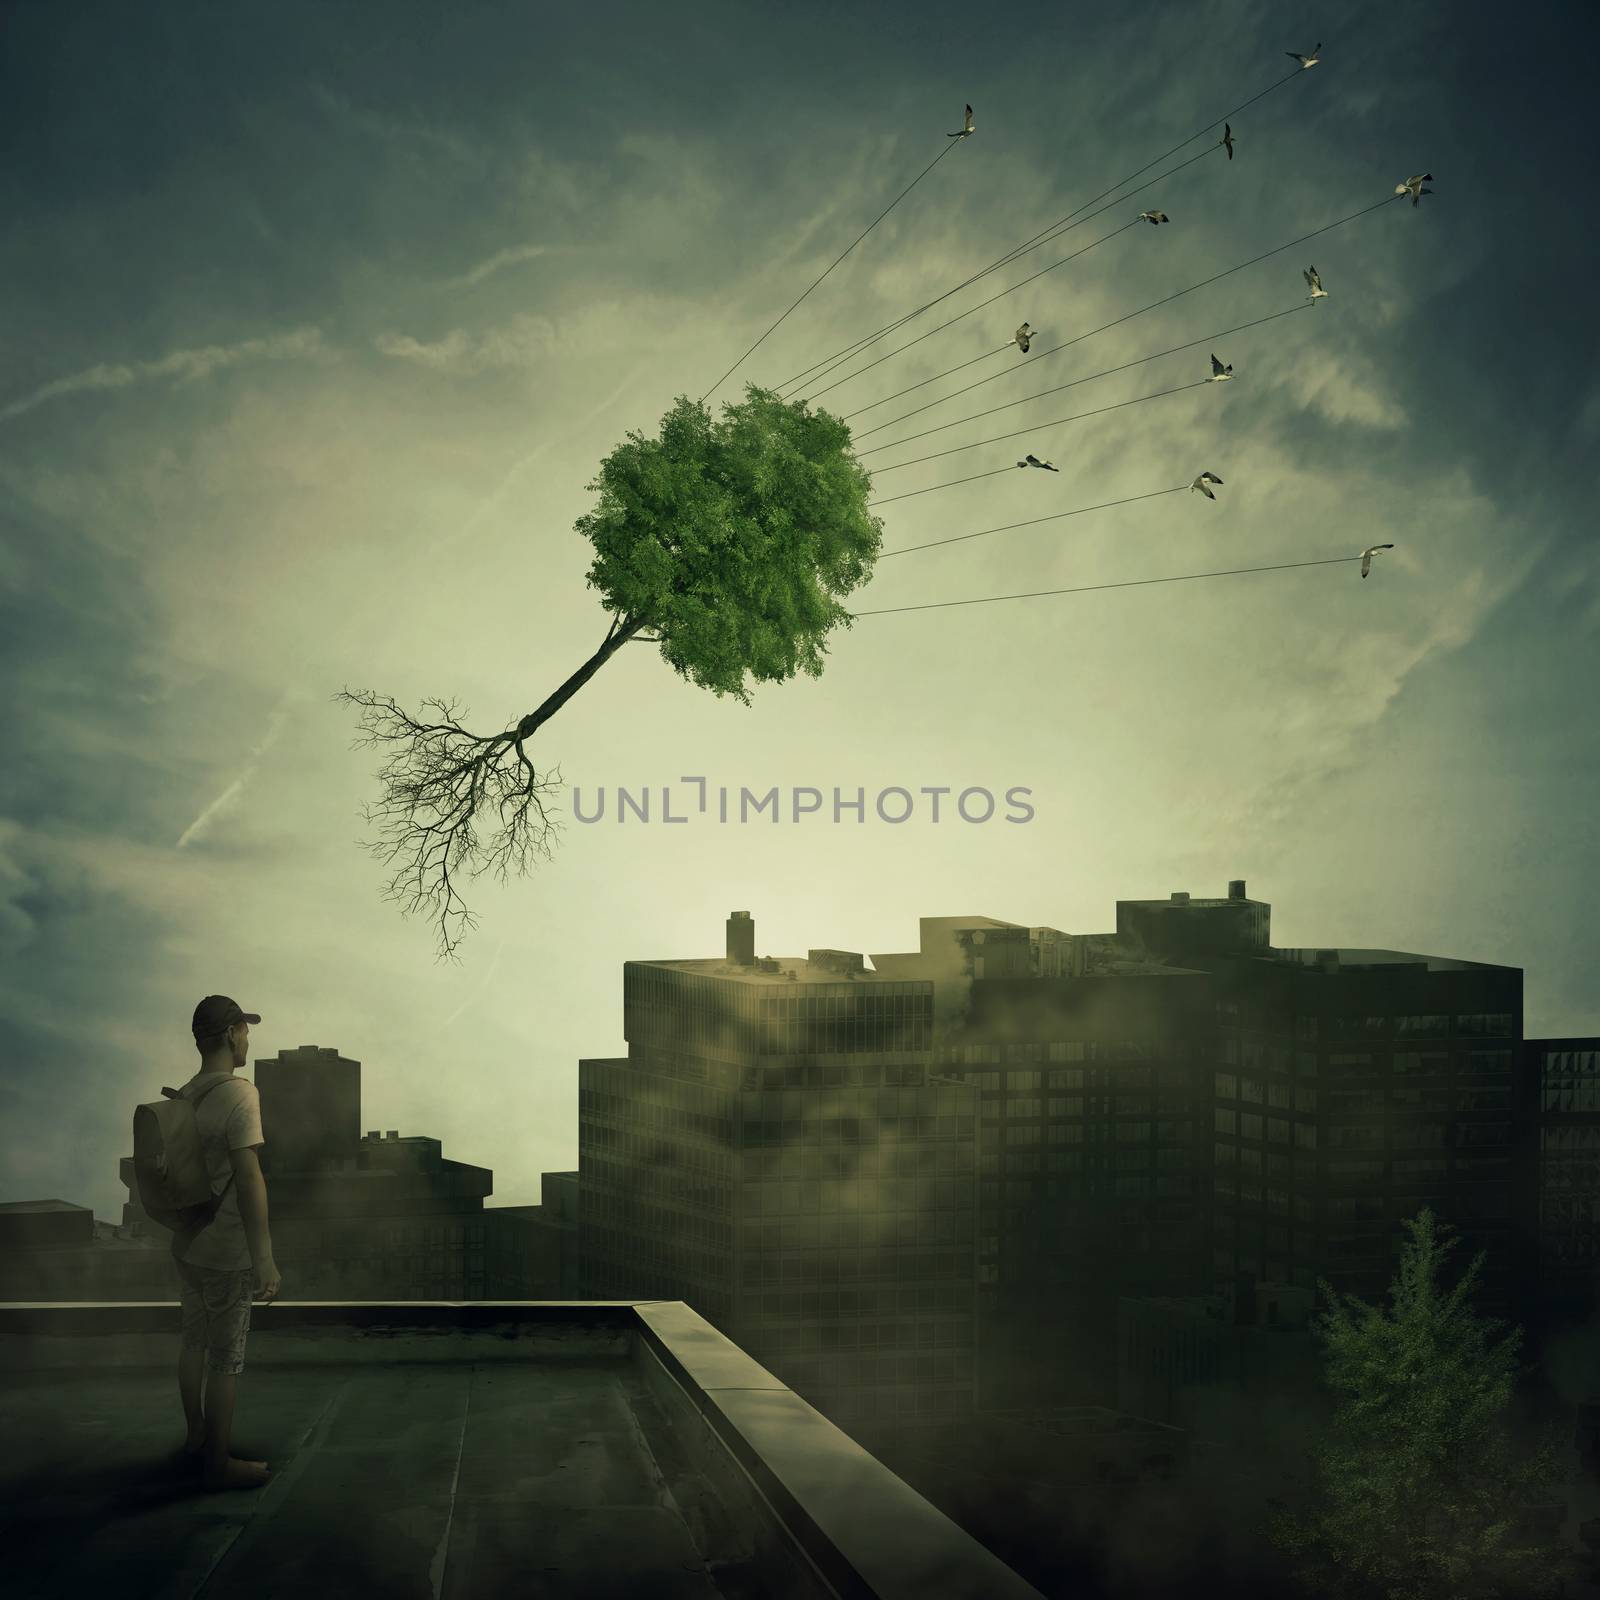 Surreal view as a boy stand on the rooftop looking at a flock of birds carrying a tree pulled from roots, flying over the polluted, foggy city. Town conservation and greening concept.